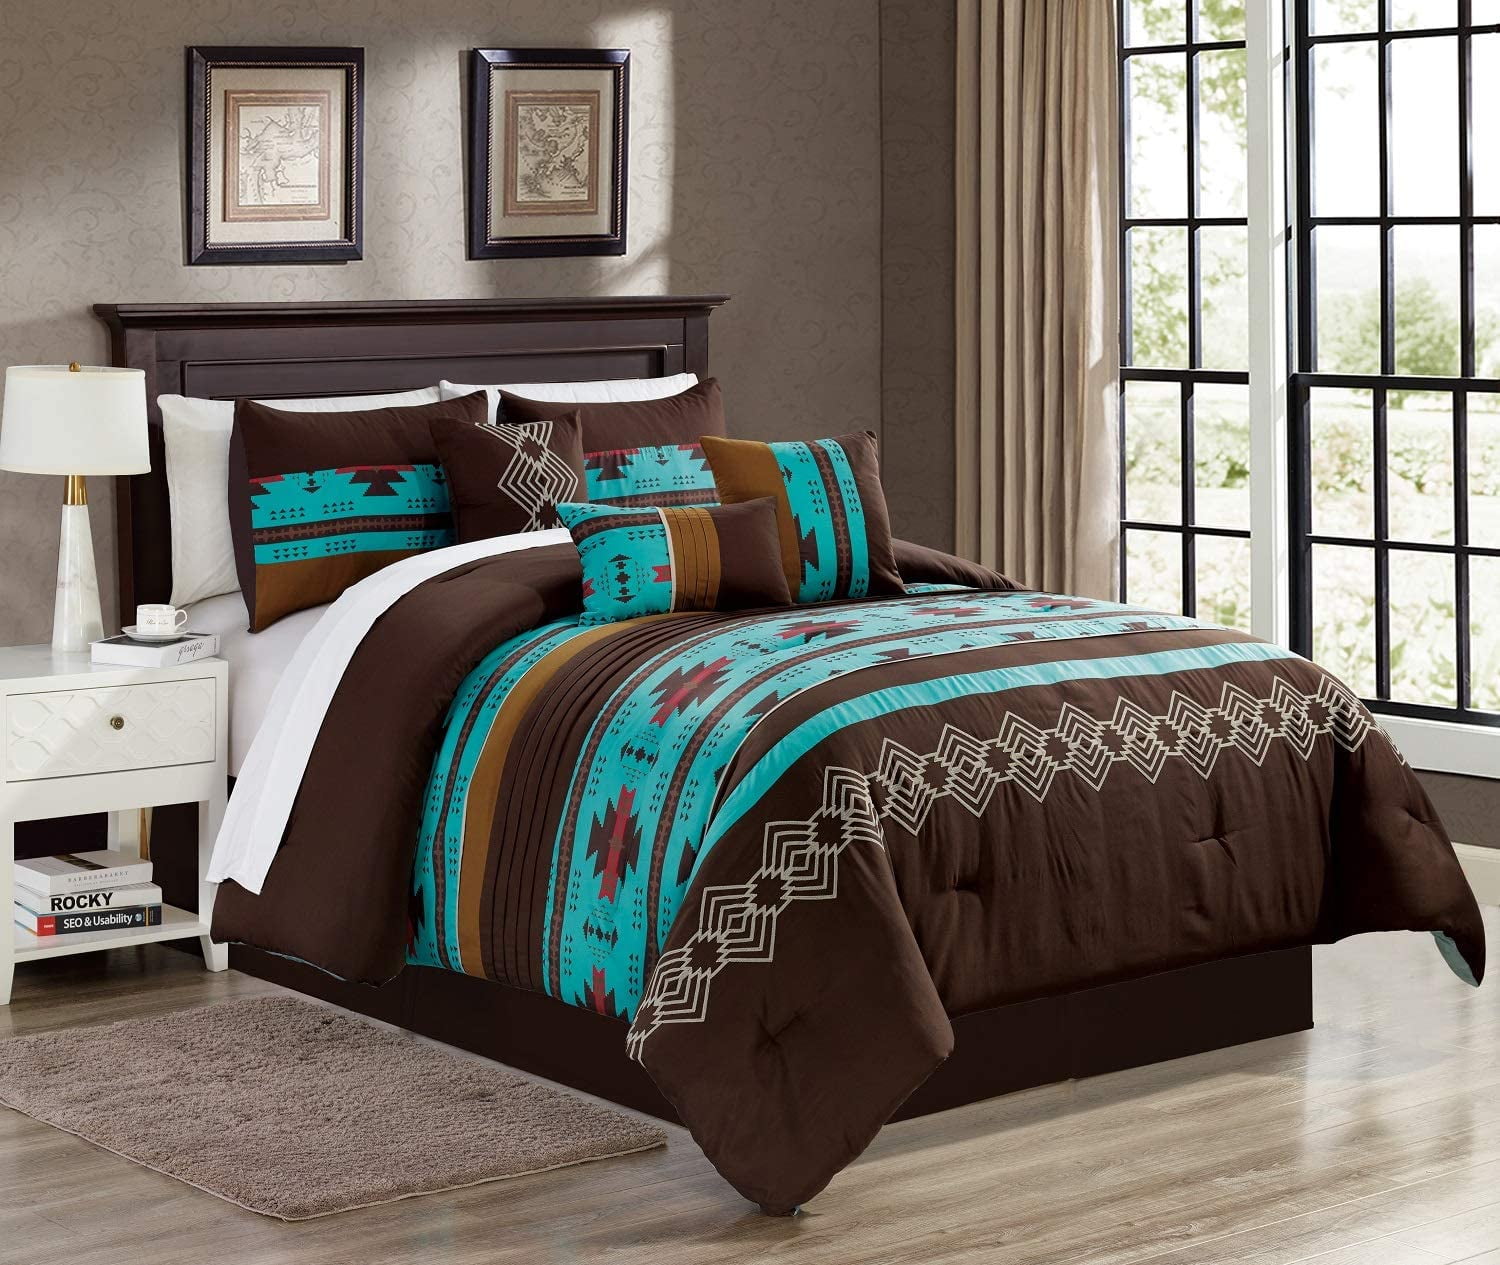 Details about   Luxury Home Collection Kids/Teens/Girls 7 Piece Queen Size Comforter Bedding Set